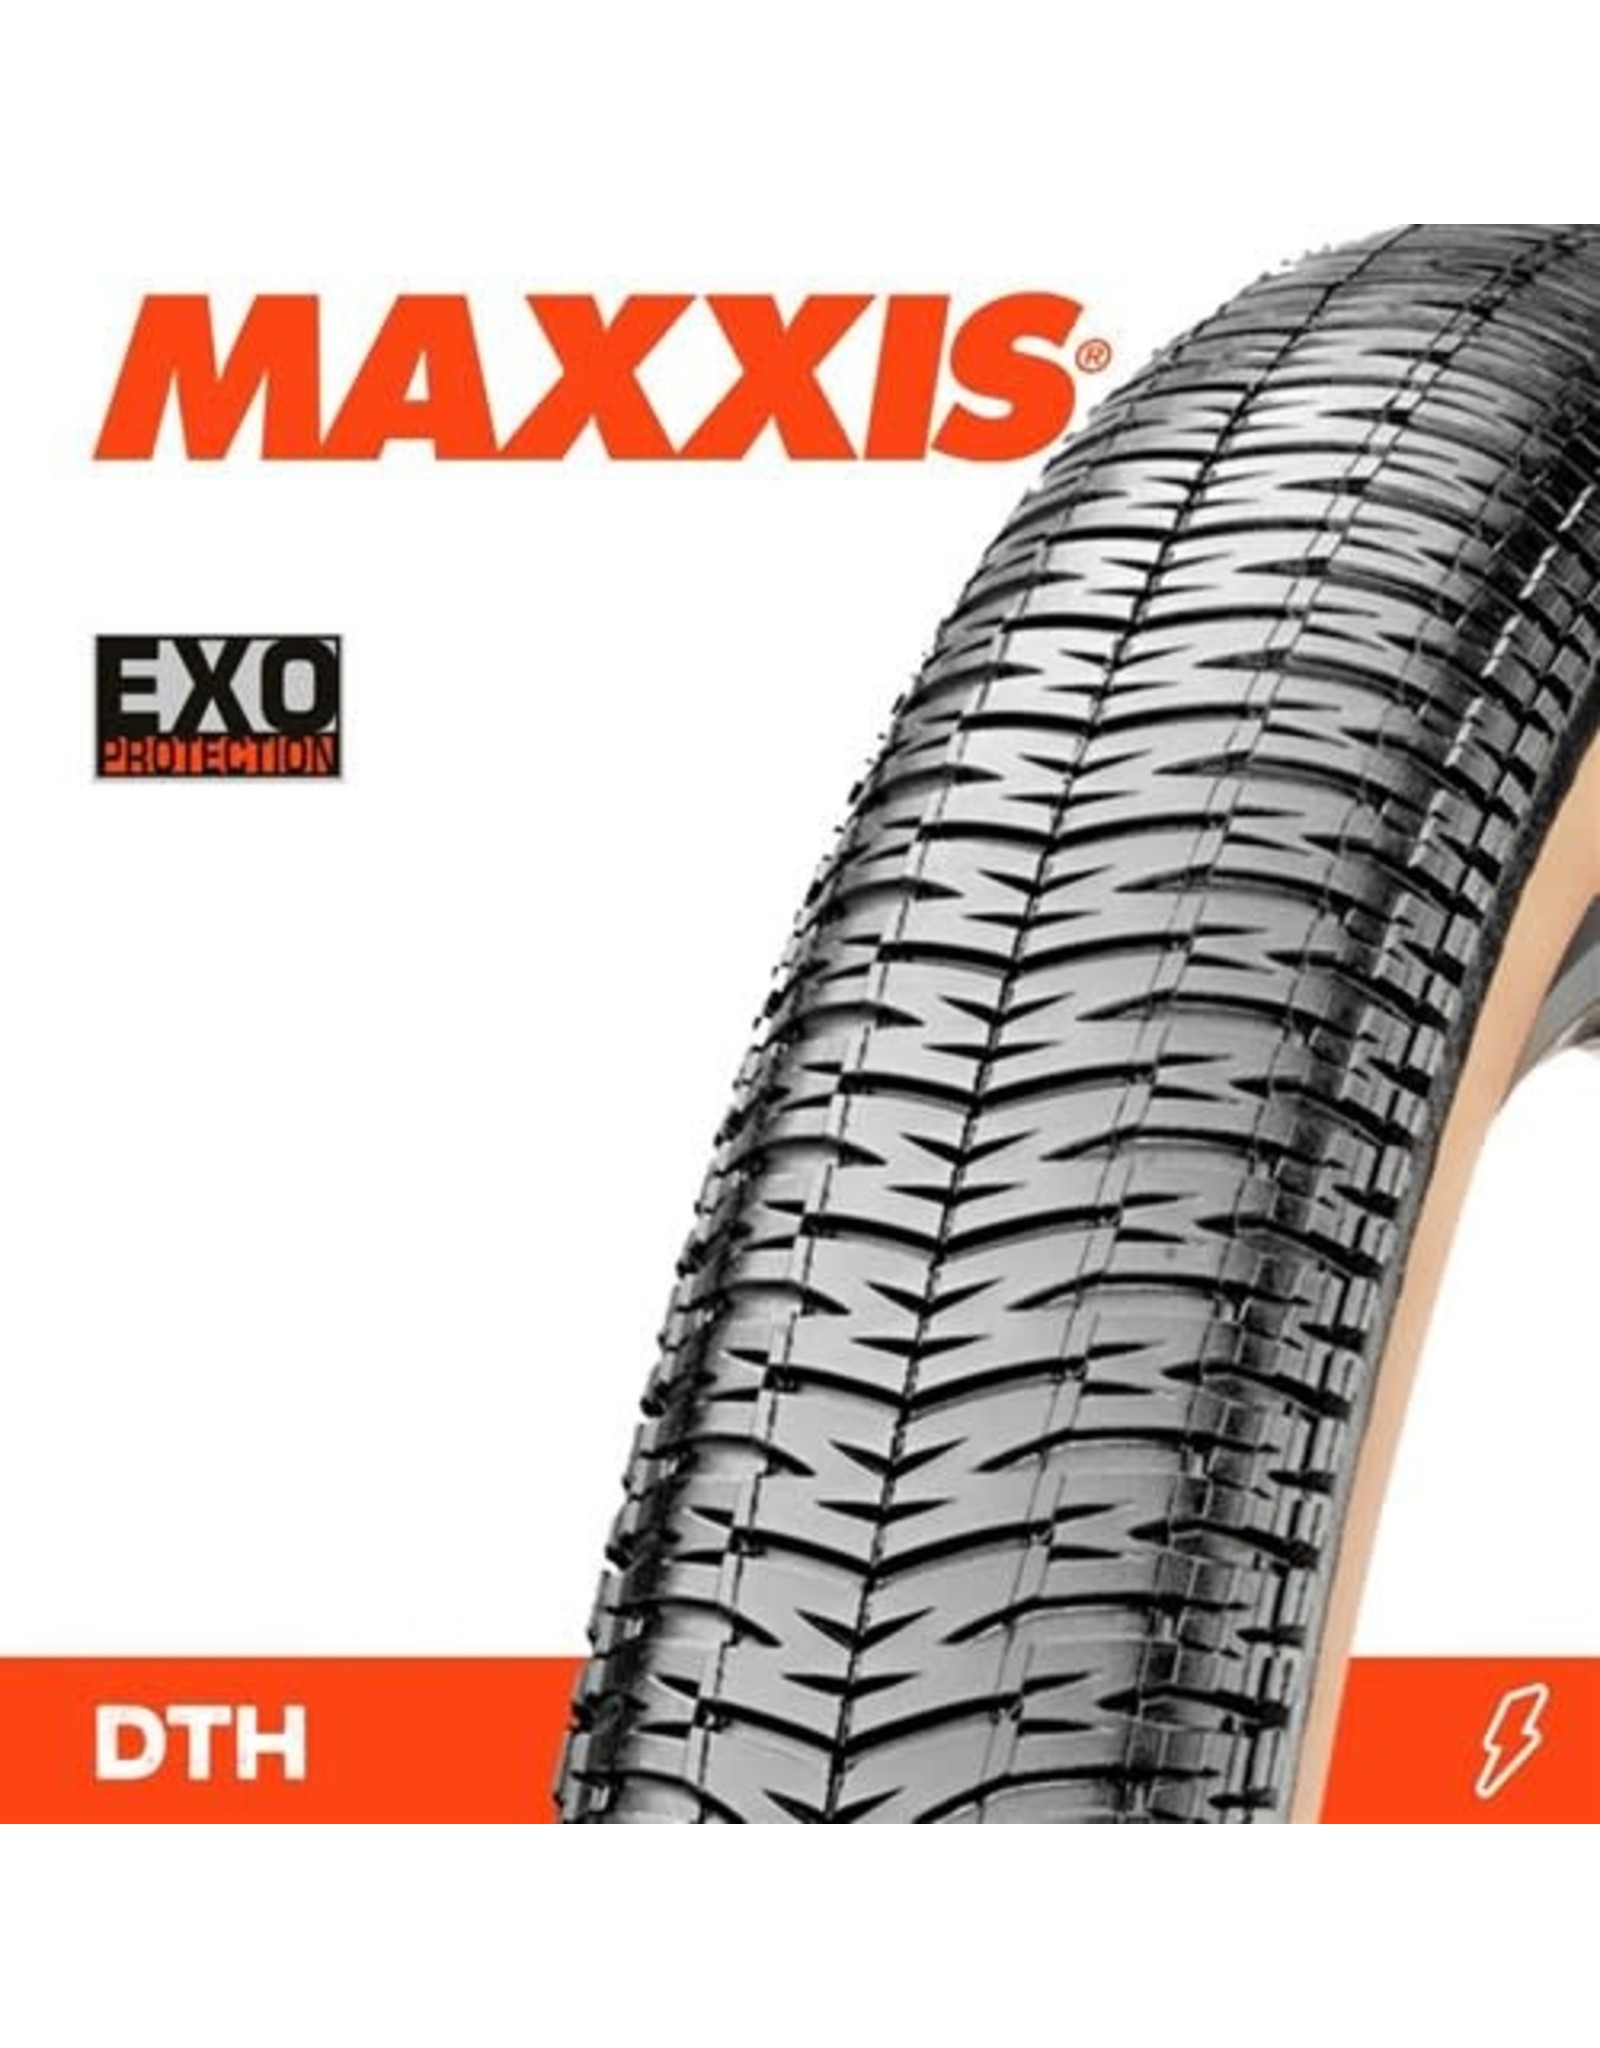 MAXXIS MAXXIS DTH 26 X 2.30” EXO TANWALL 60TPI TYRE